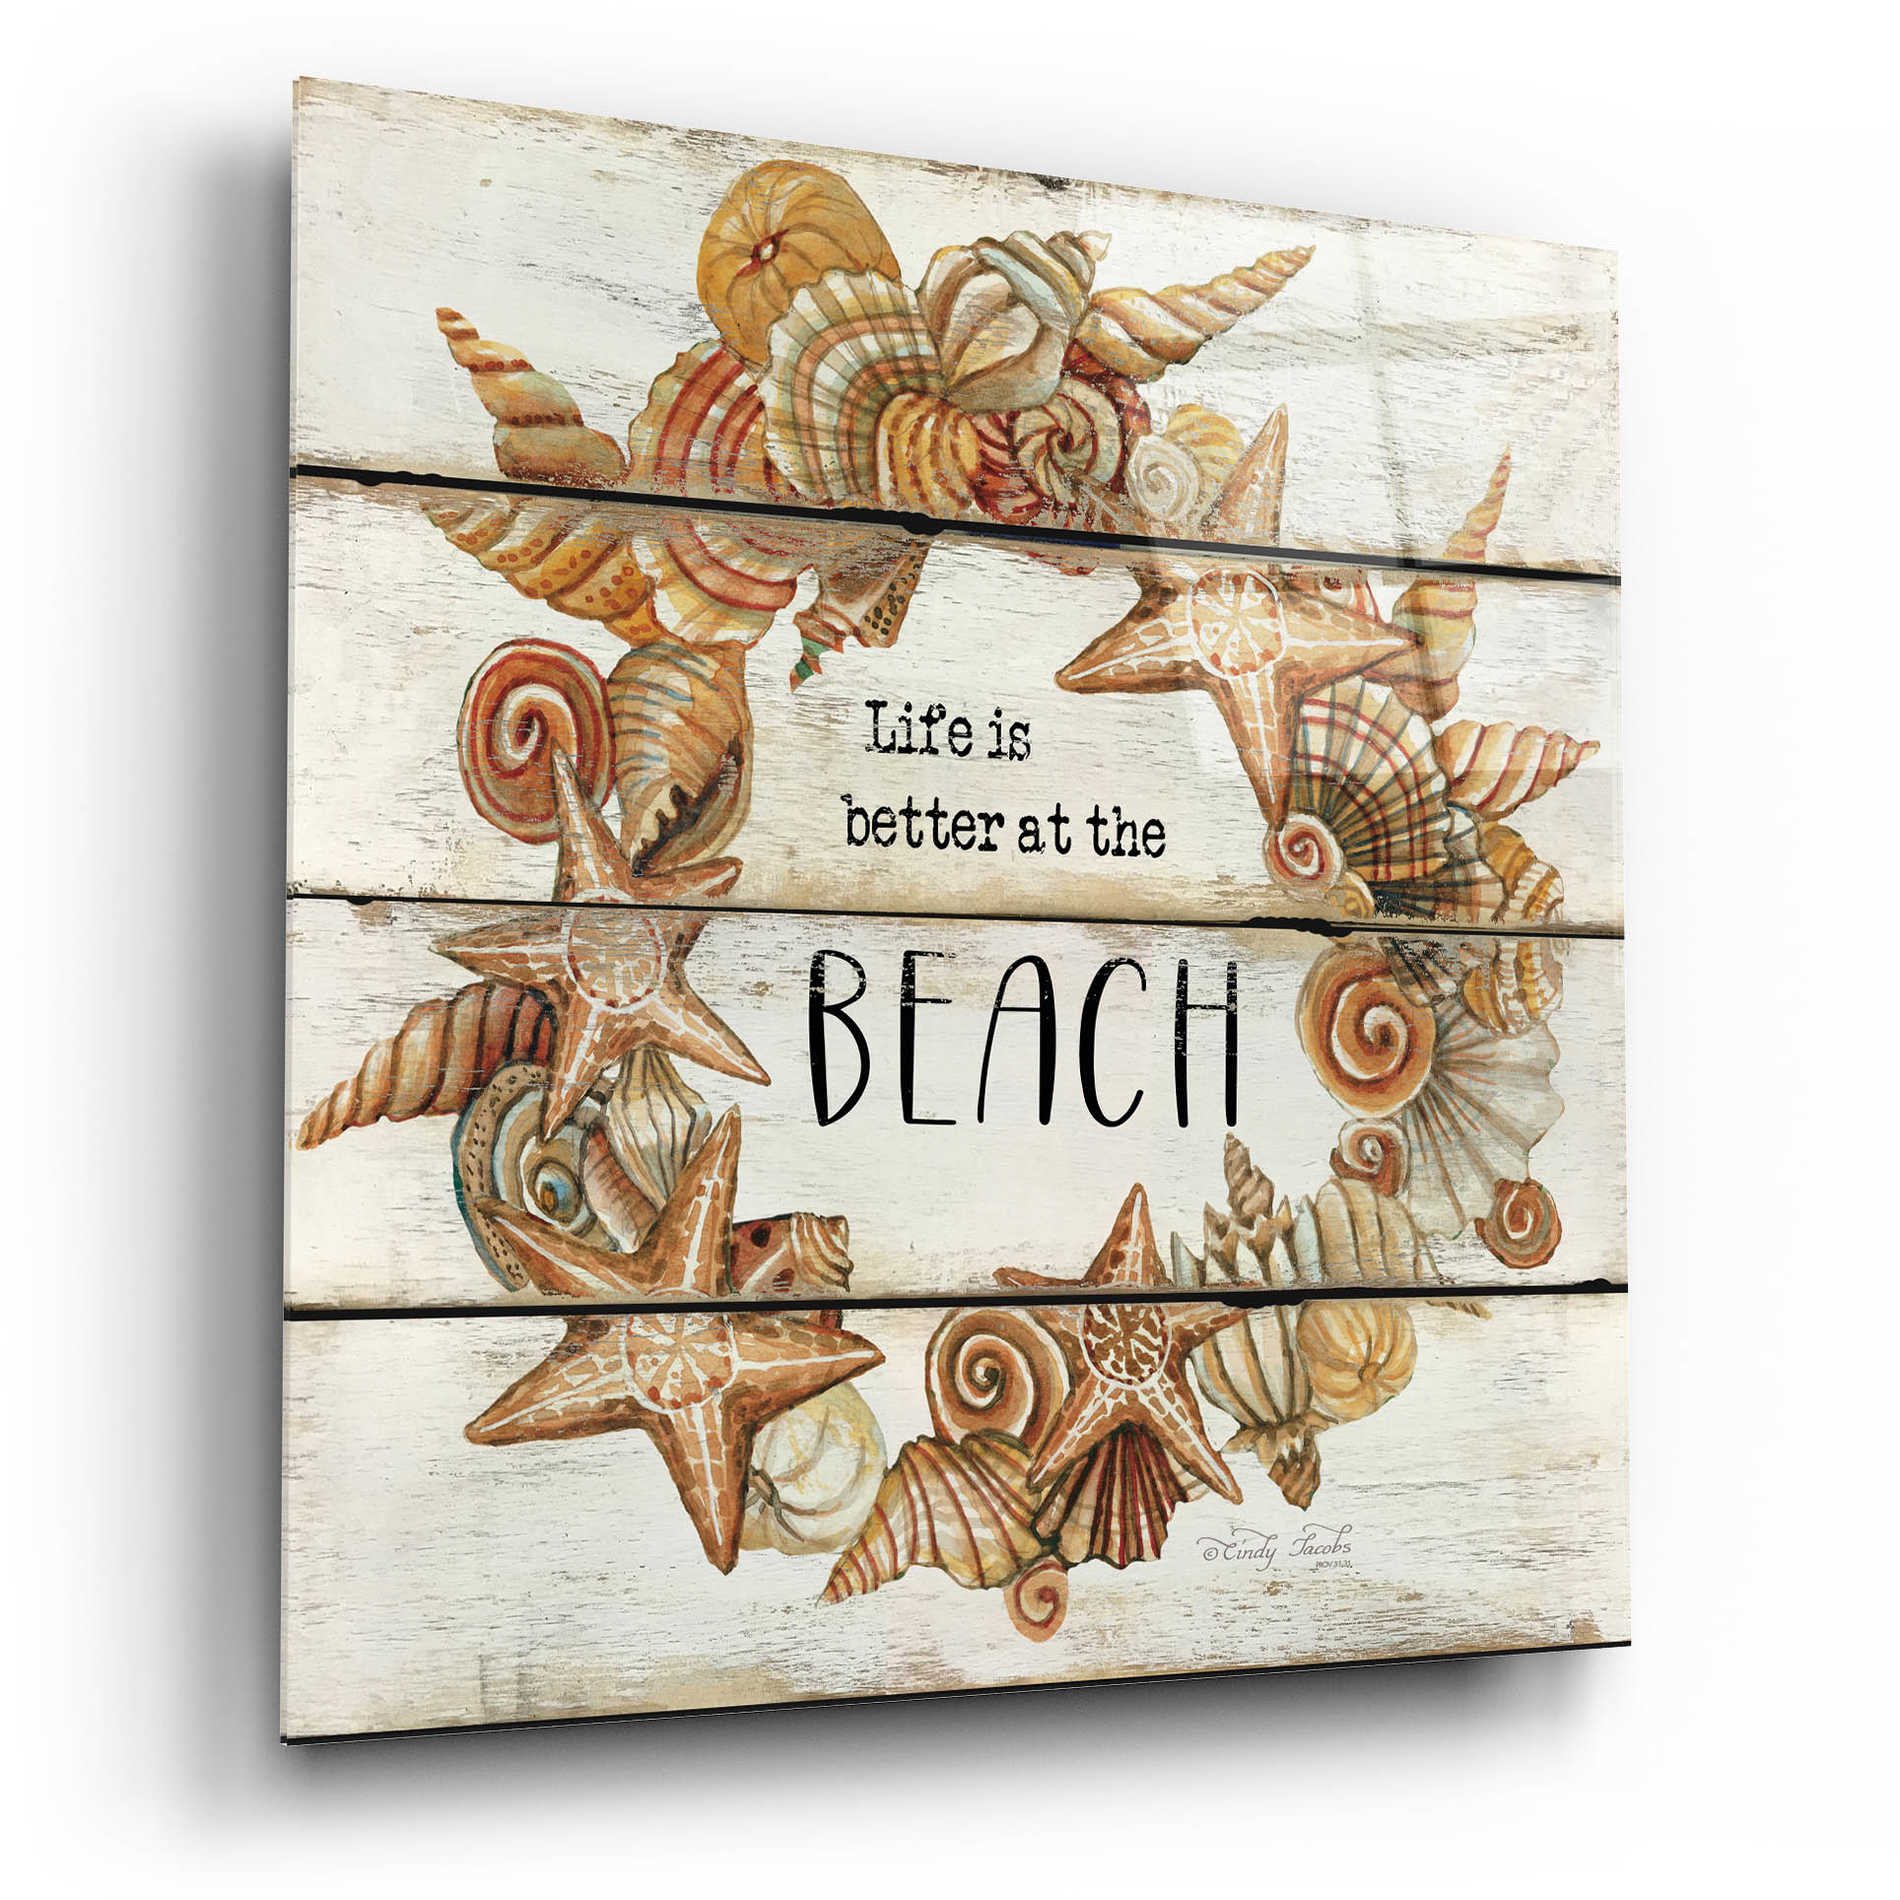 Epic Art 'Life is Better at the Beach' by Cindy Jacobs, Acrylic Glass Wall Art,12x12